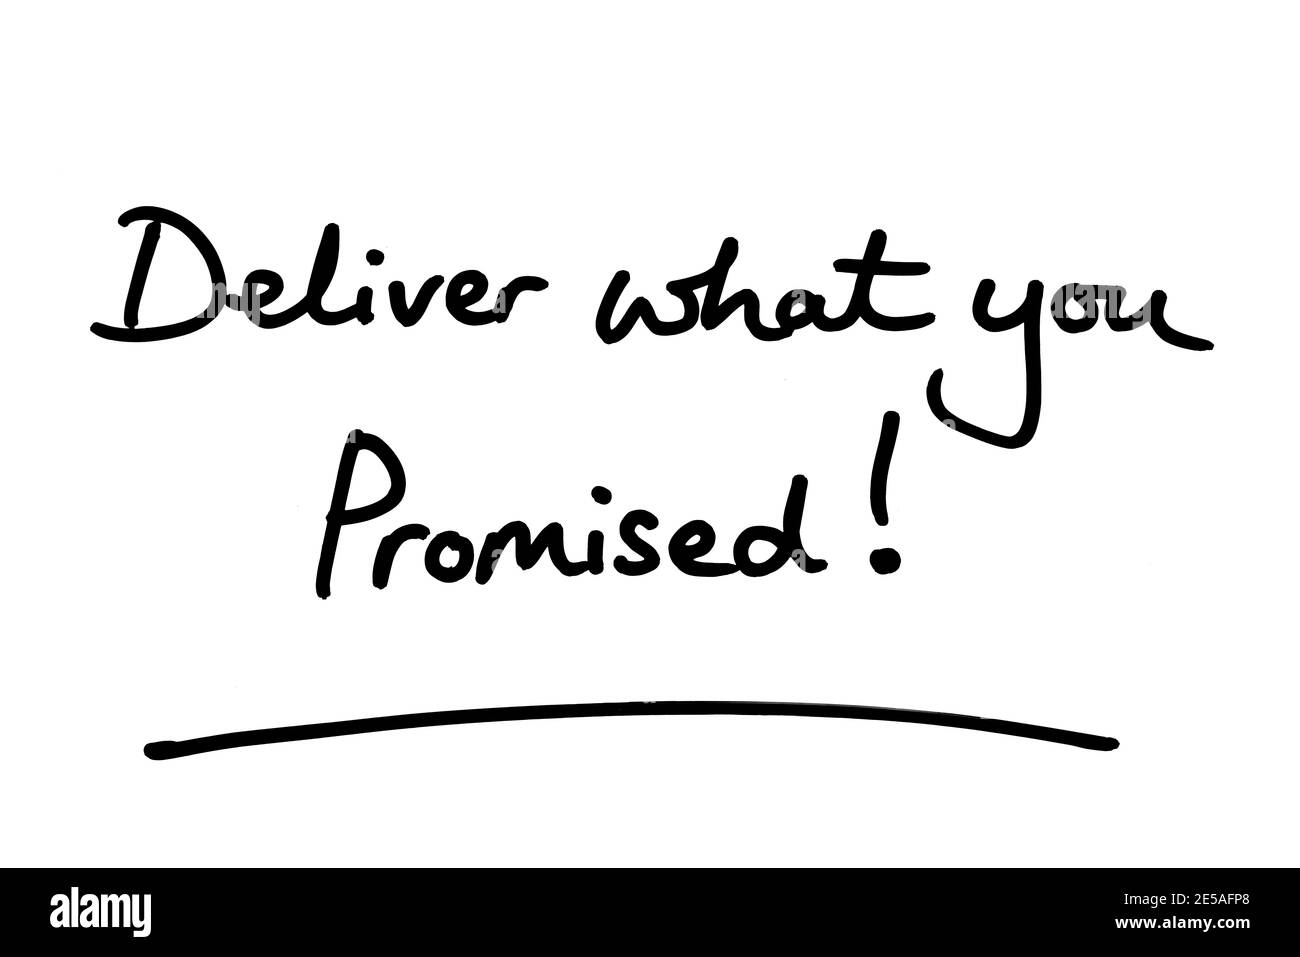 Deliver what you promised! handwritten on a white background. Stock Photo